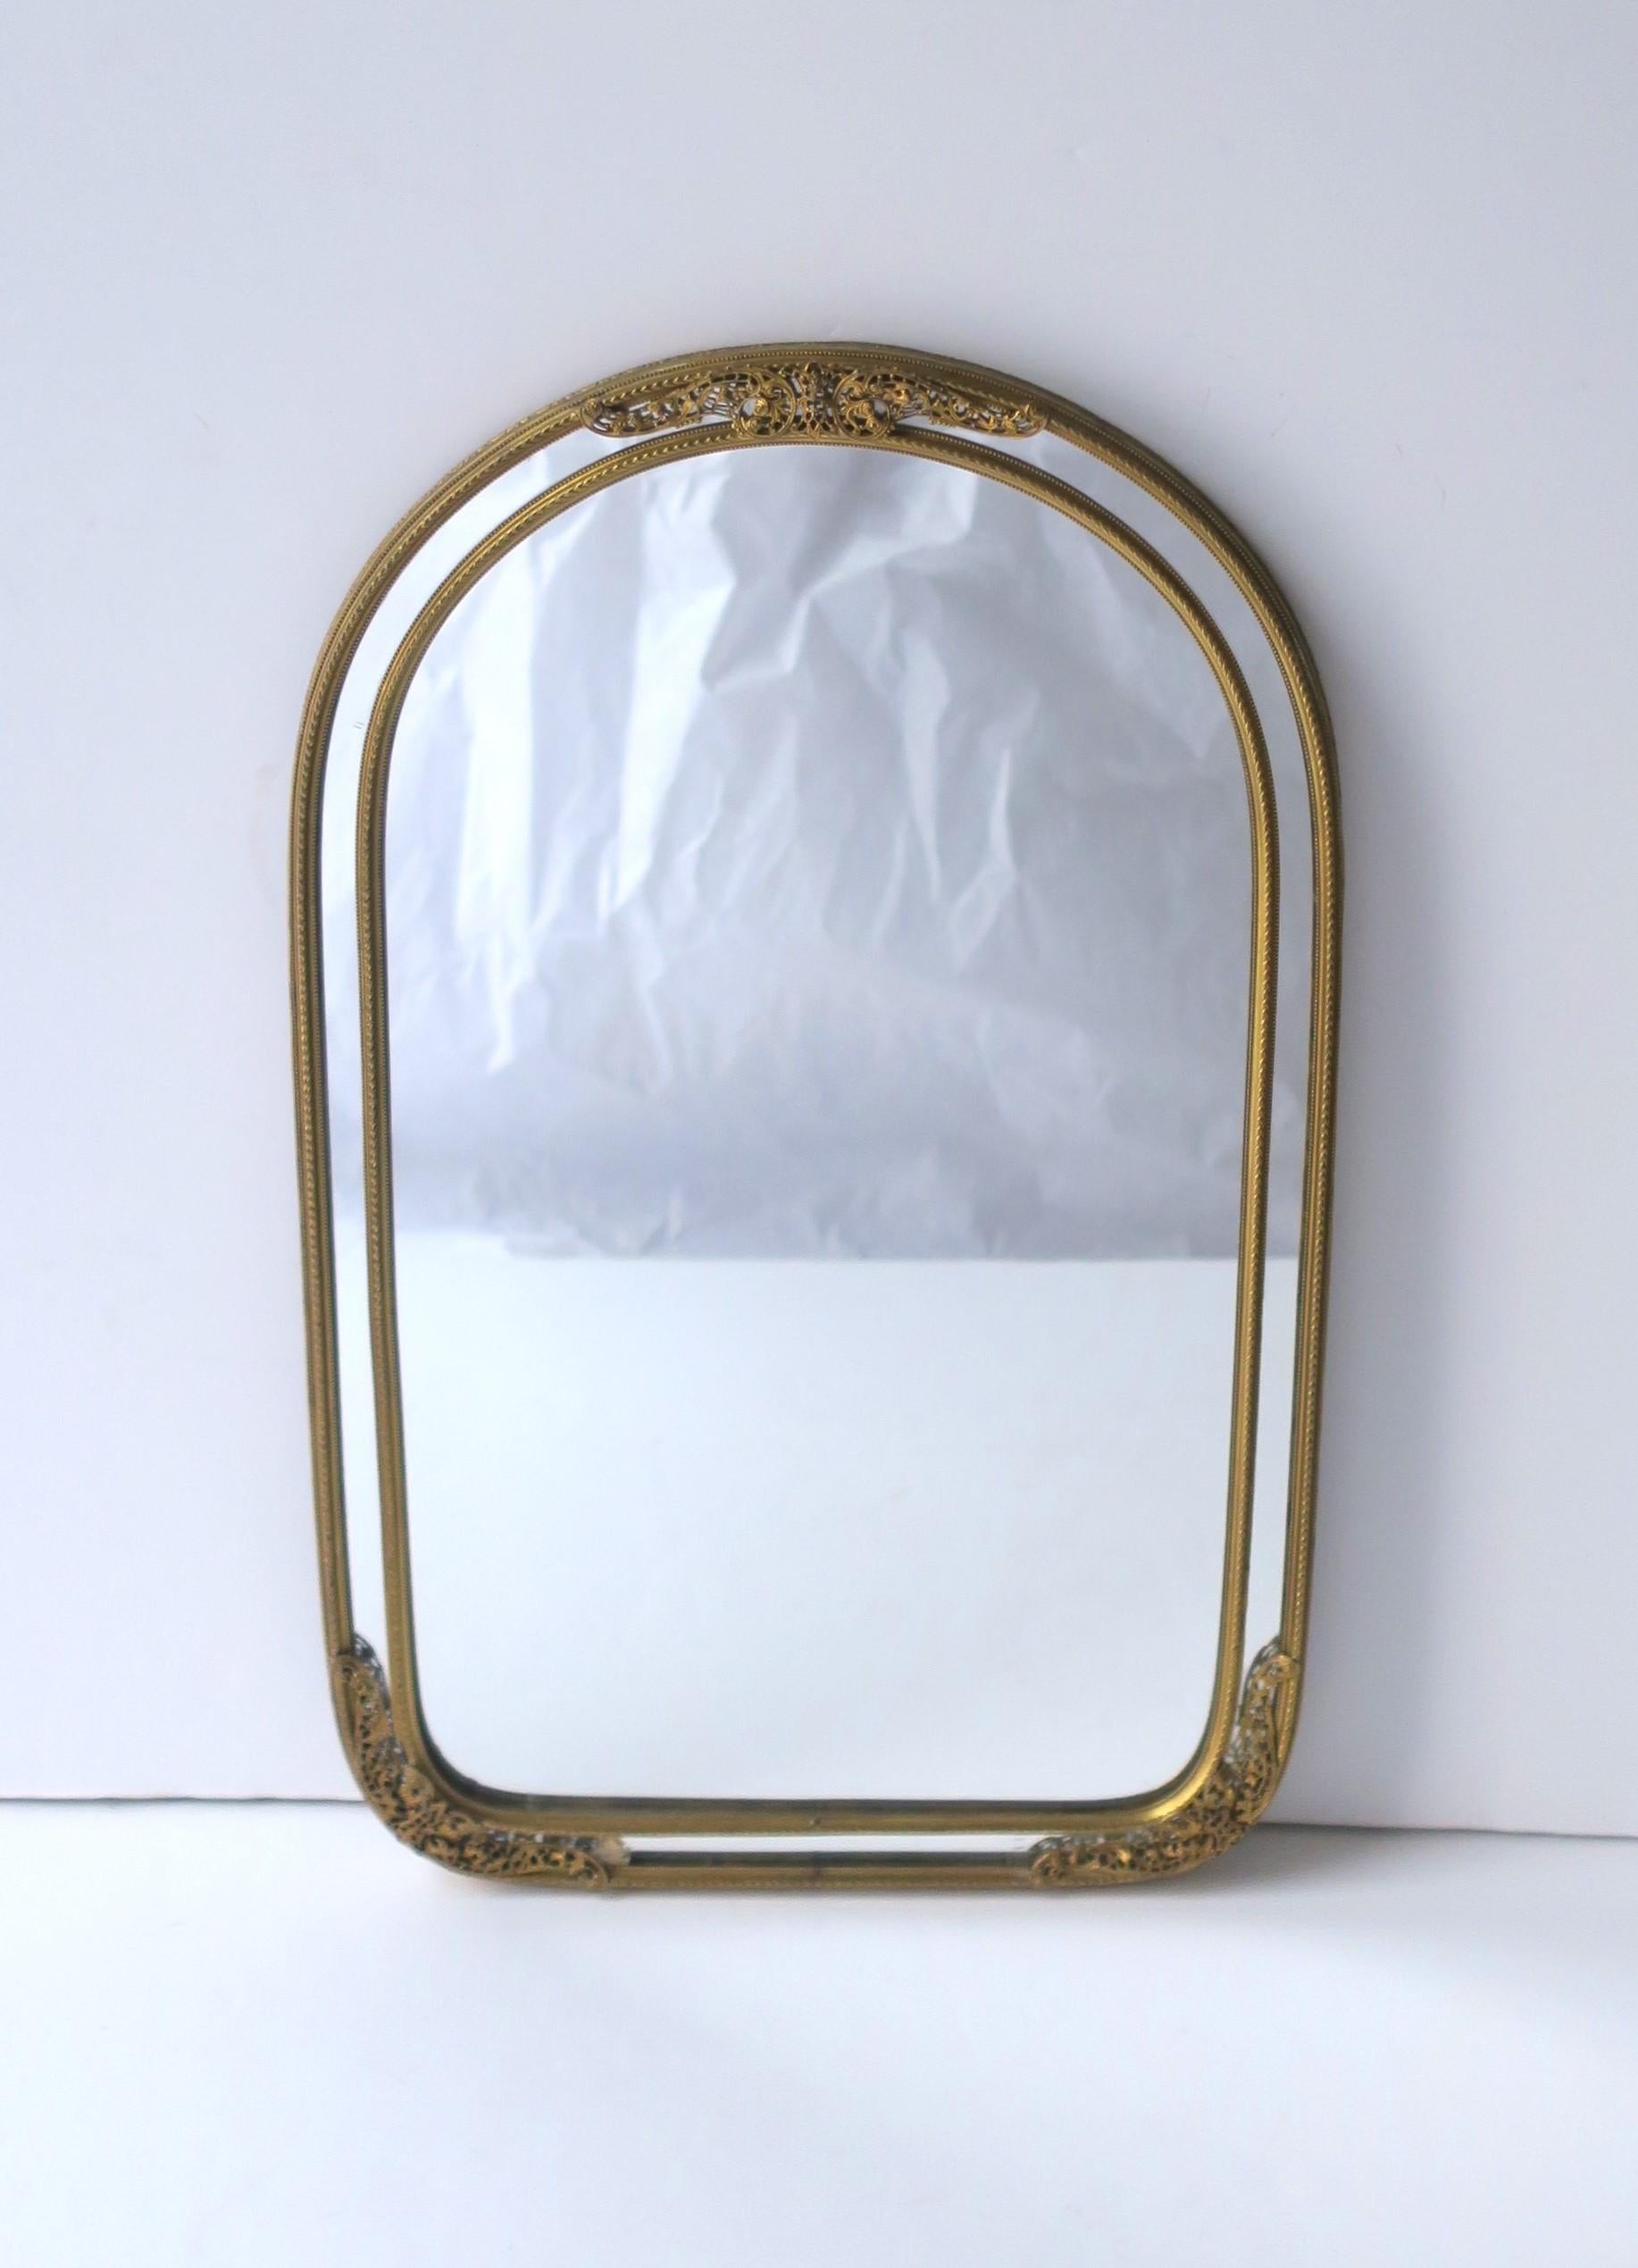 A beautiful and well-made European brass wall mirror, circa early-20th century, Europe. Beautiful, small details are all around this quality brass frame. Mirror is on the smaller side of typical wall mirrors; piece would work well where a fine,